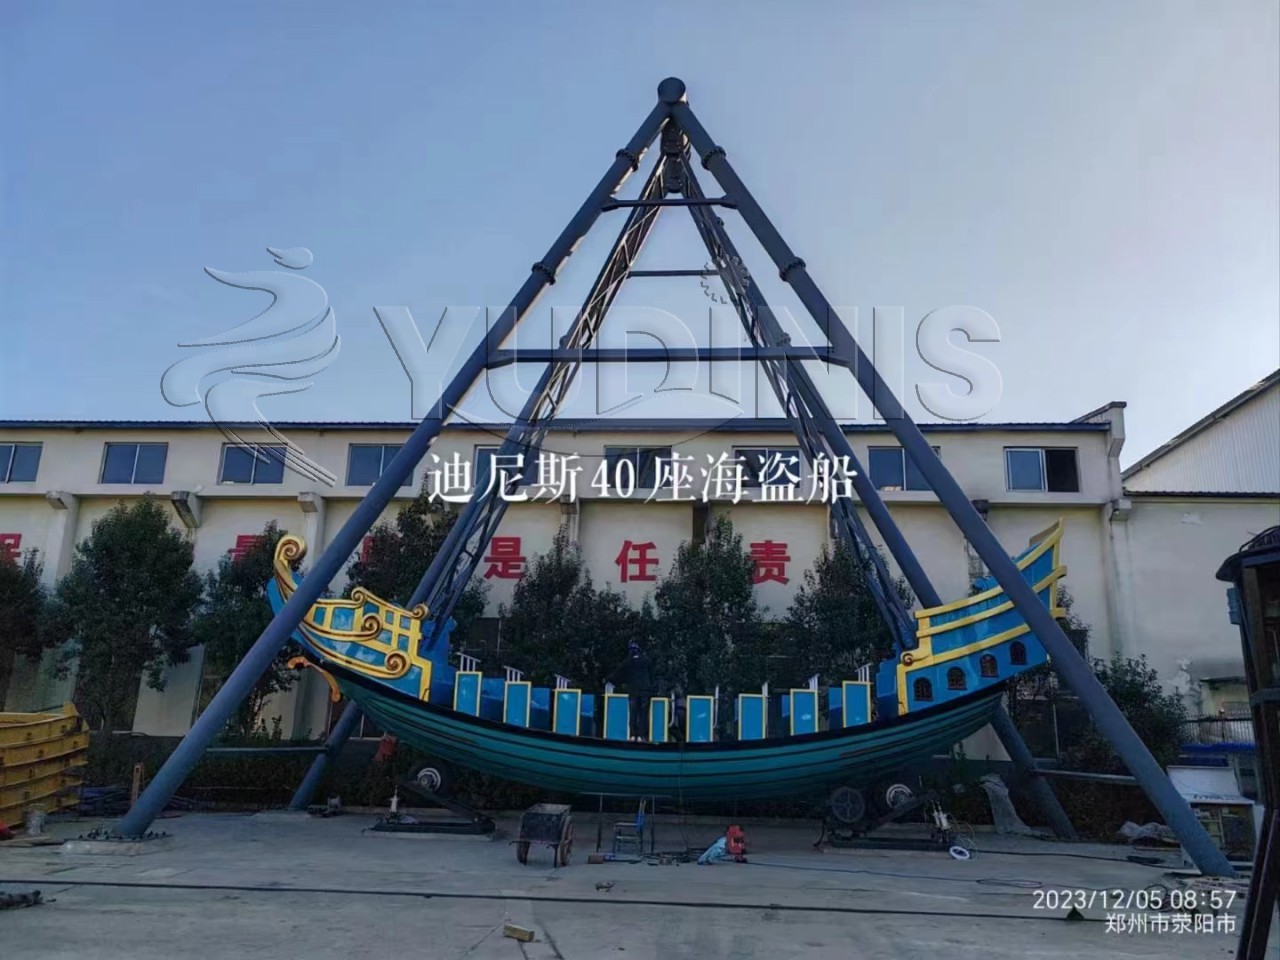 Dinis pirate ship for sale